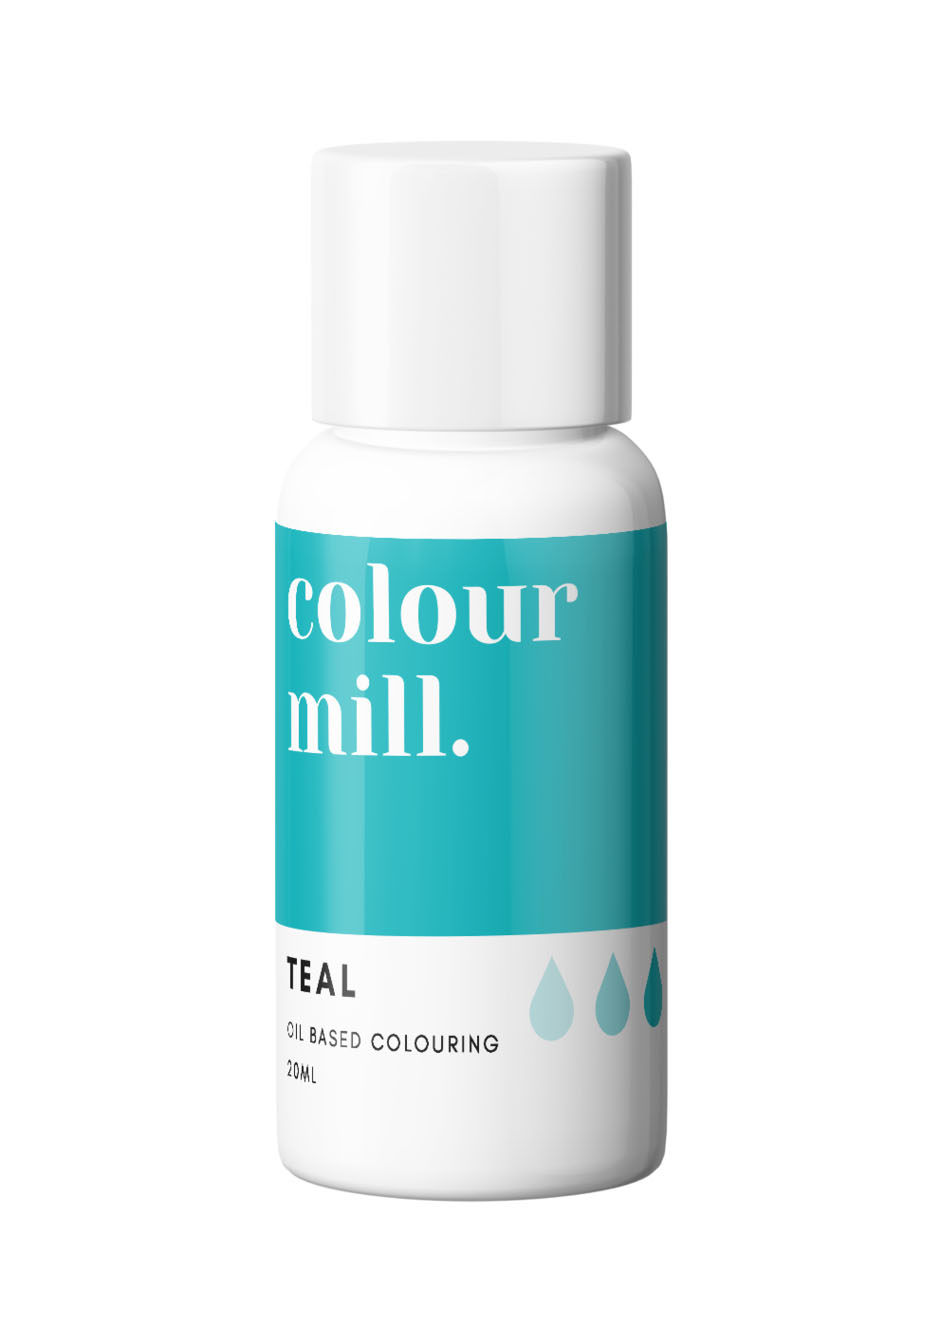 Colour Mill Teal Colouring 20ml